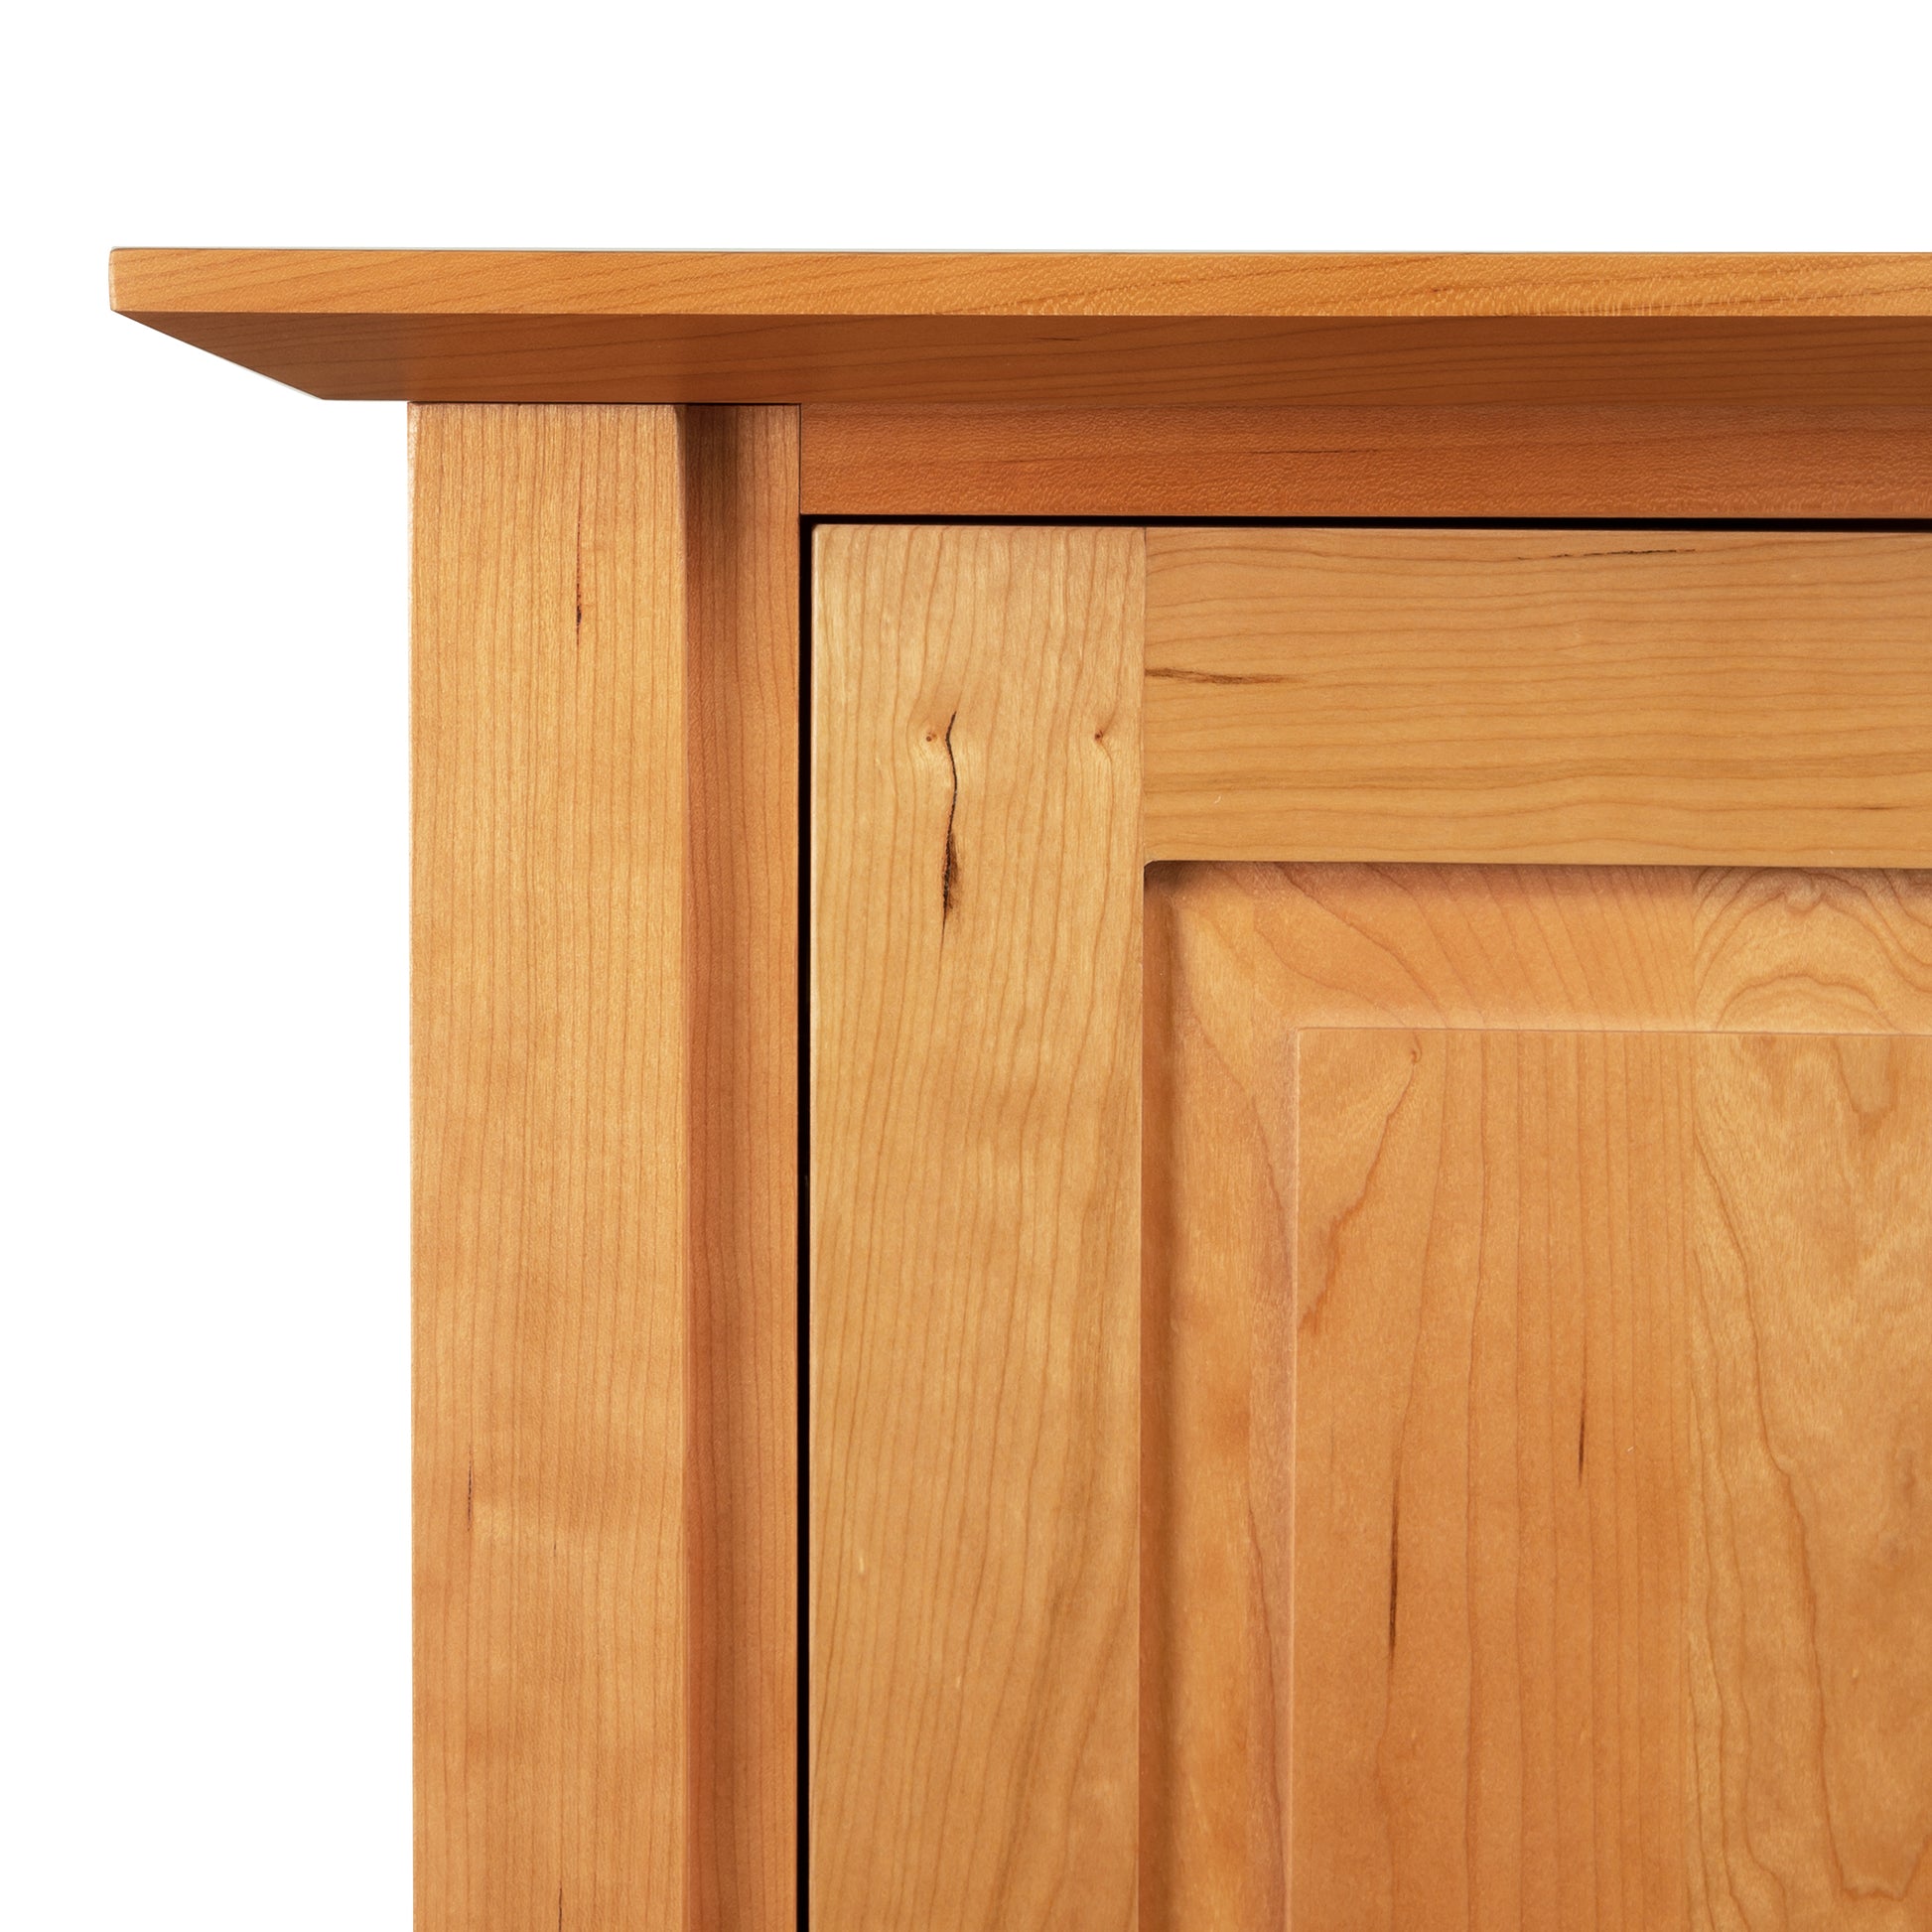 A close up of a Lyndon Furniture Classic Shaker Large Buffet cabinet door.